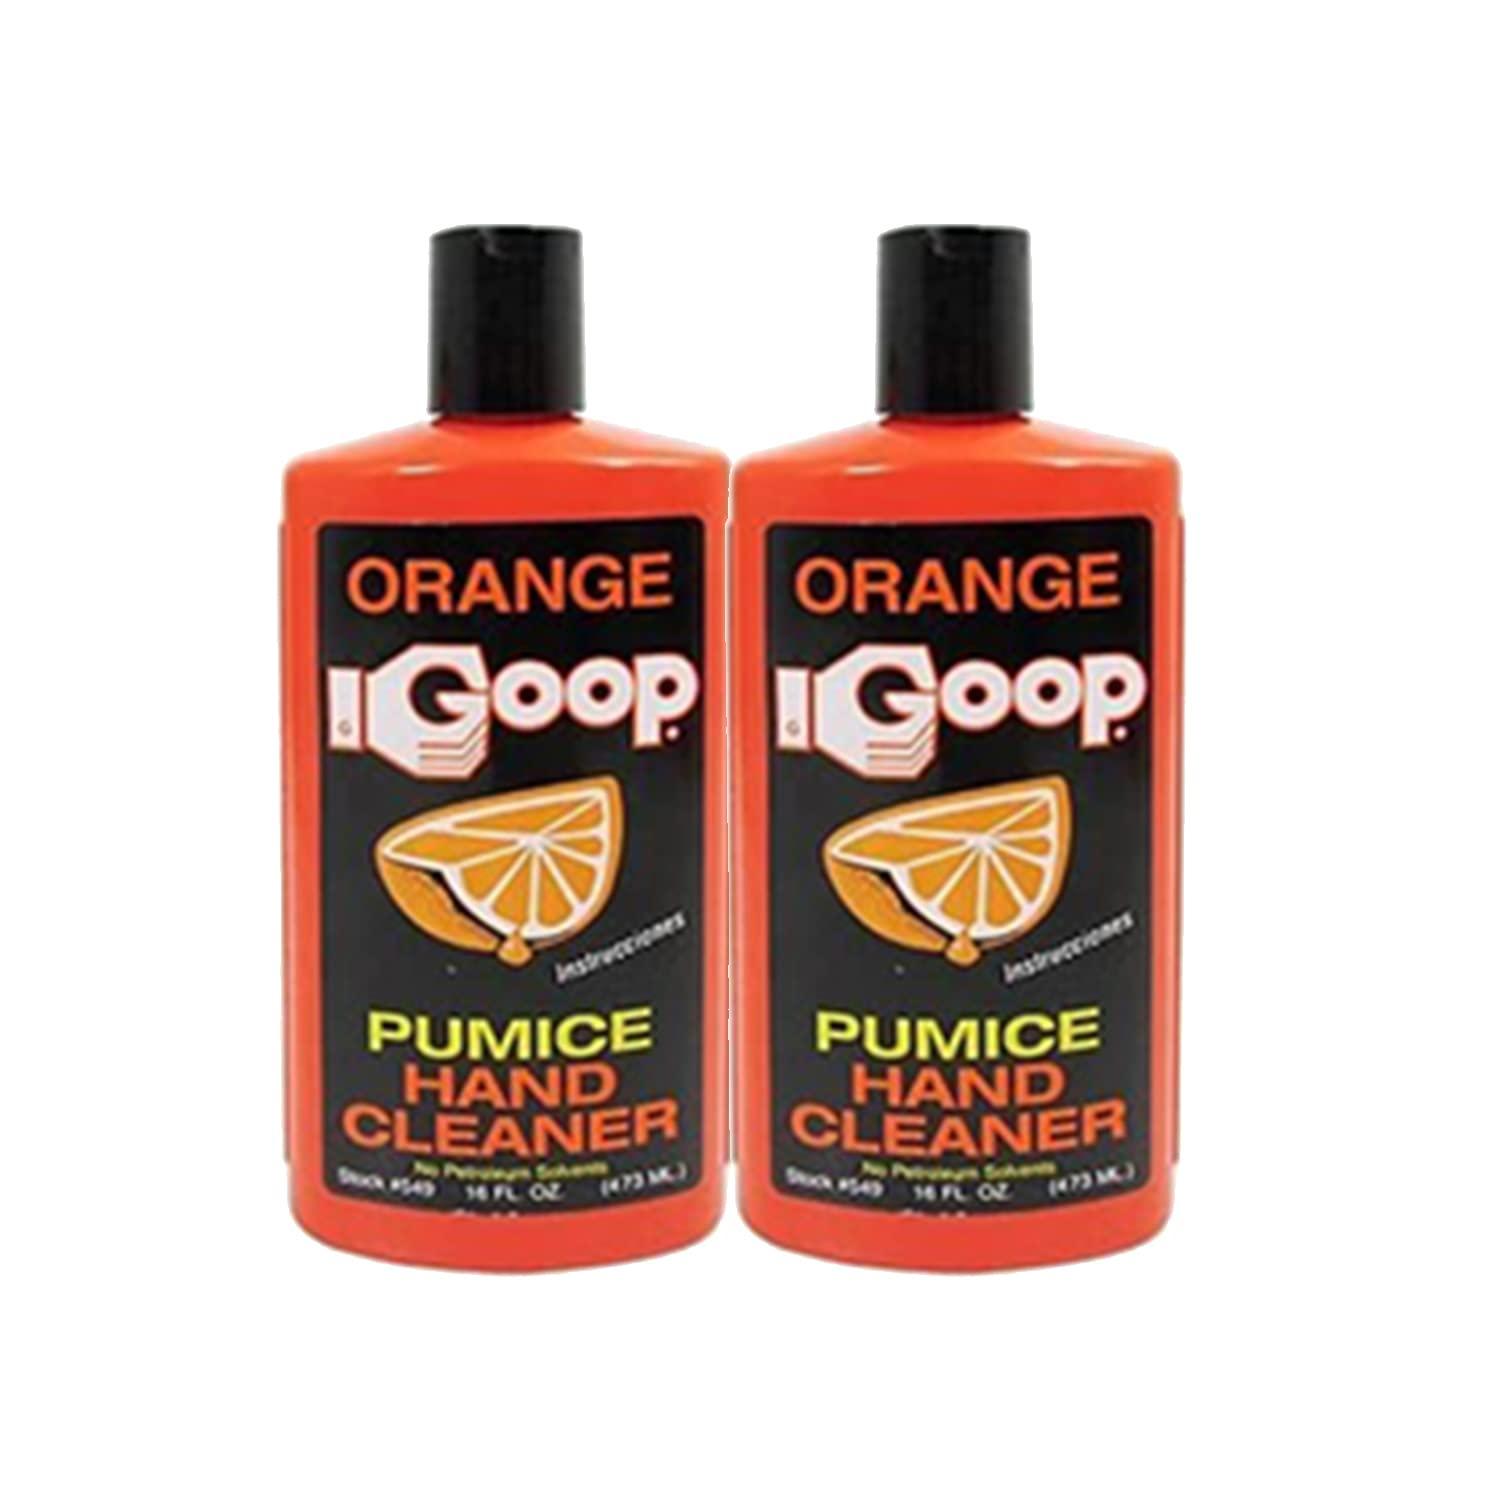 Goop Multi-Purpose Hand Cleaner Orange Citrus Scent and Pumice - Waterless  Hand Degreaser and Laundry Stain Remover - Non-Toxic Cleaner to Remove  Dirt, Oil, Paint, Ink, and Clothes Stains - 16oz (Pack